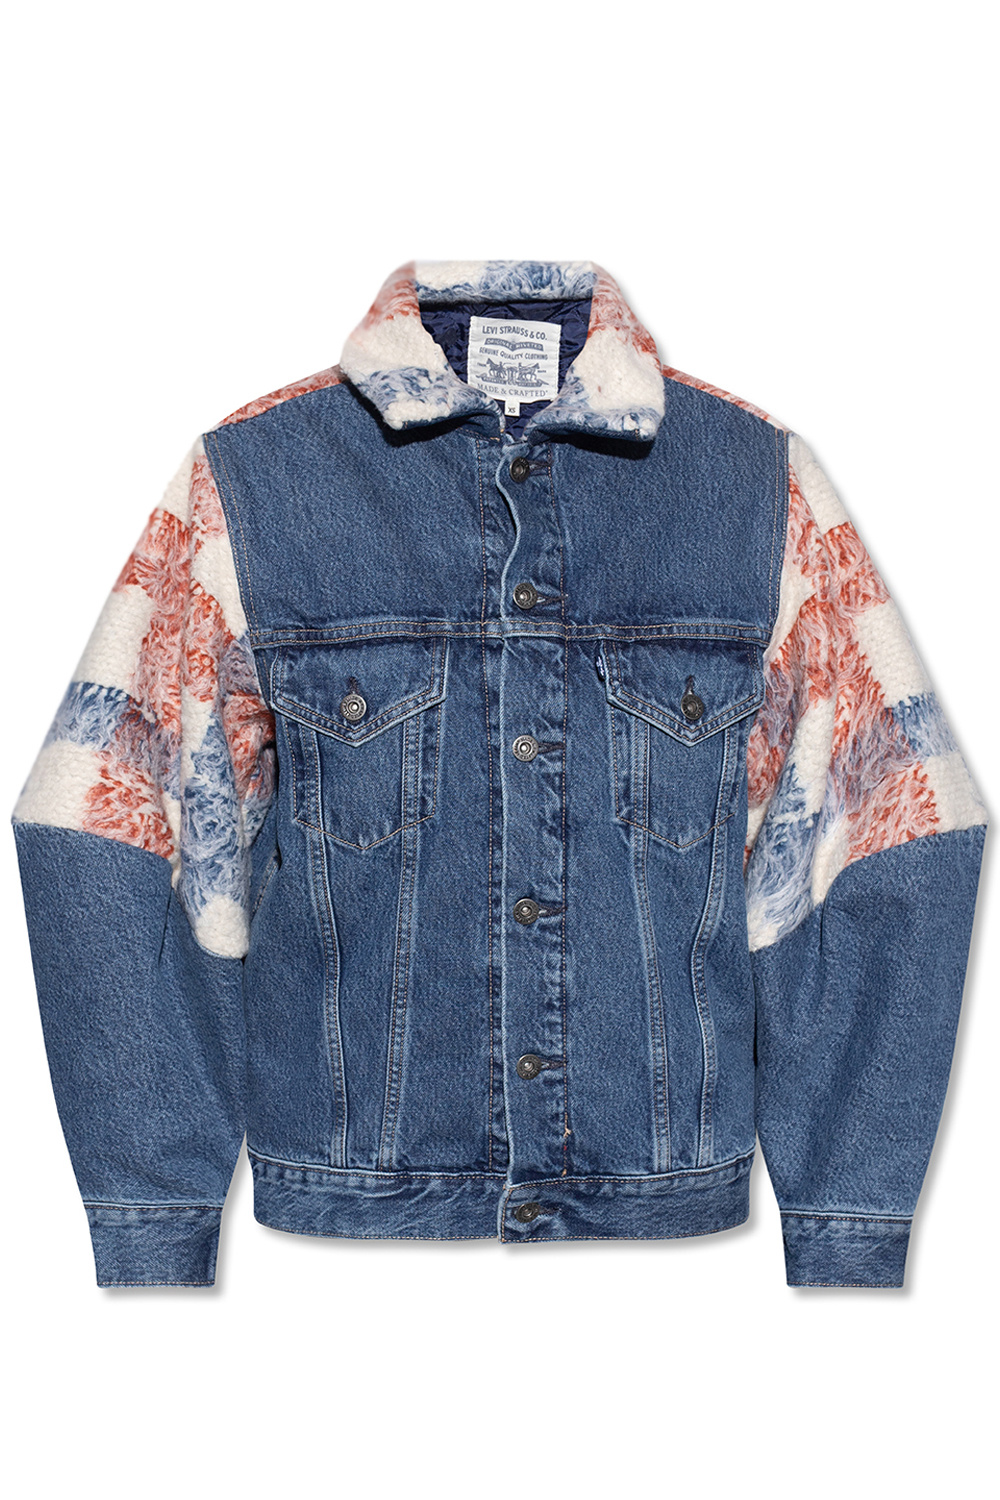 Denim jacket 'Made & Crafted®' collection Levi's - IetpShops BF -  Tagliatore cropped tweed jacket